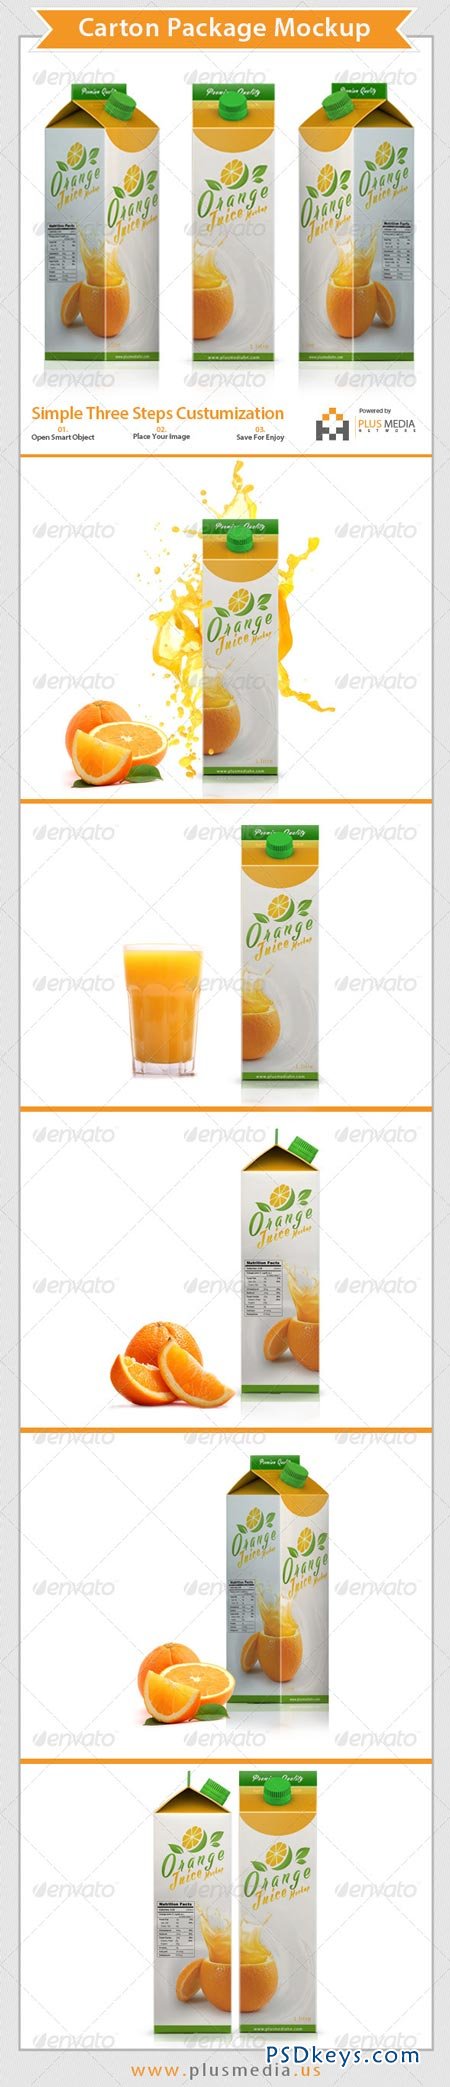 Carton Package for Juice Mockup 6621870